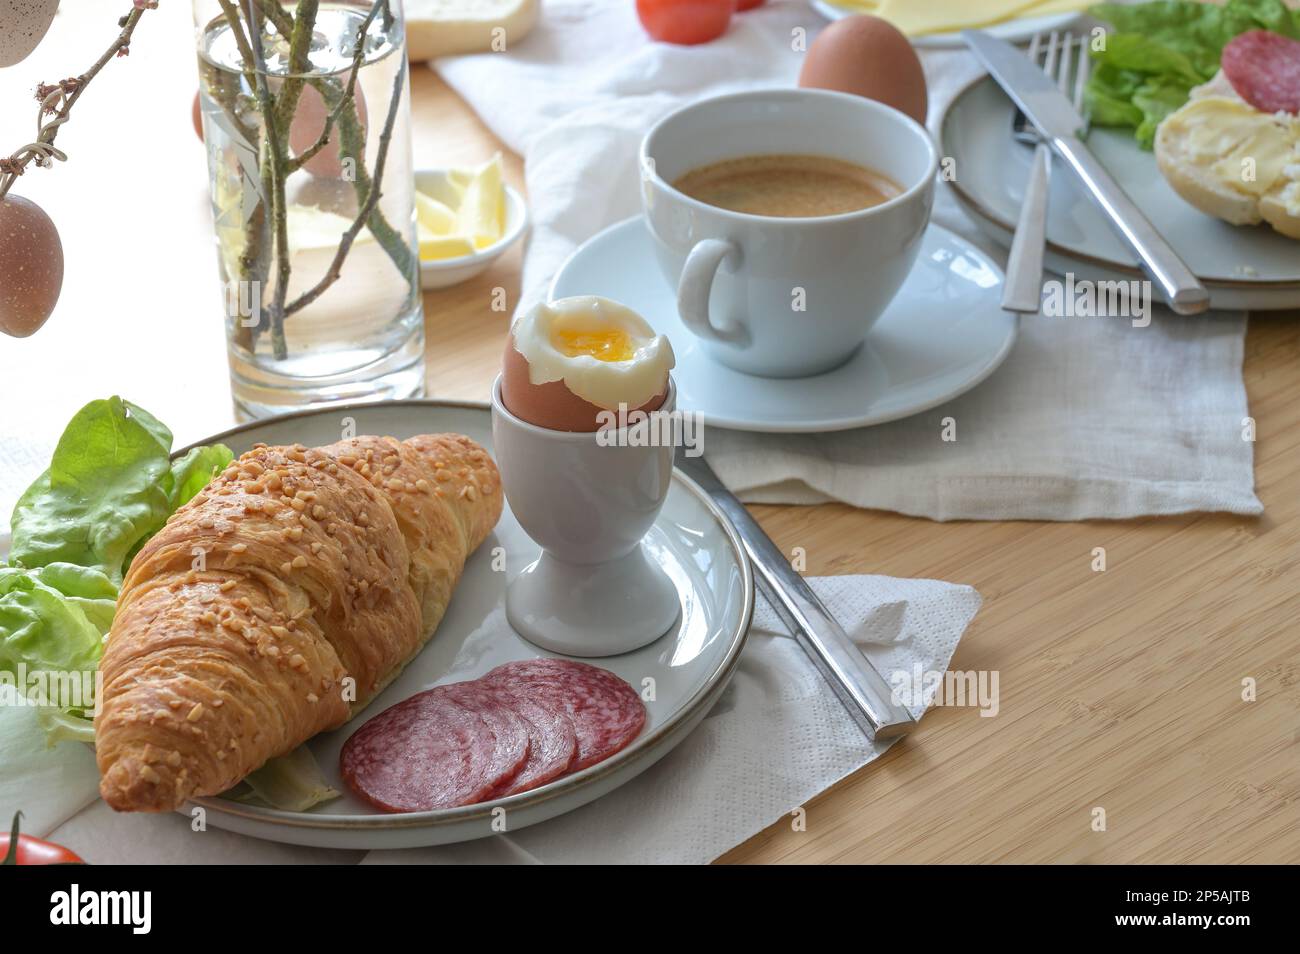 Breakfast or brunch with croissant, cooked egg, sausage, cheese and coffee on light napkins and a wooden table, selected focus, narrow depth of field Stock Photo